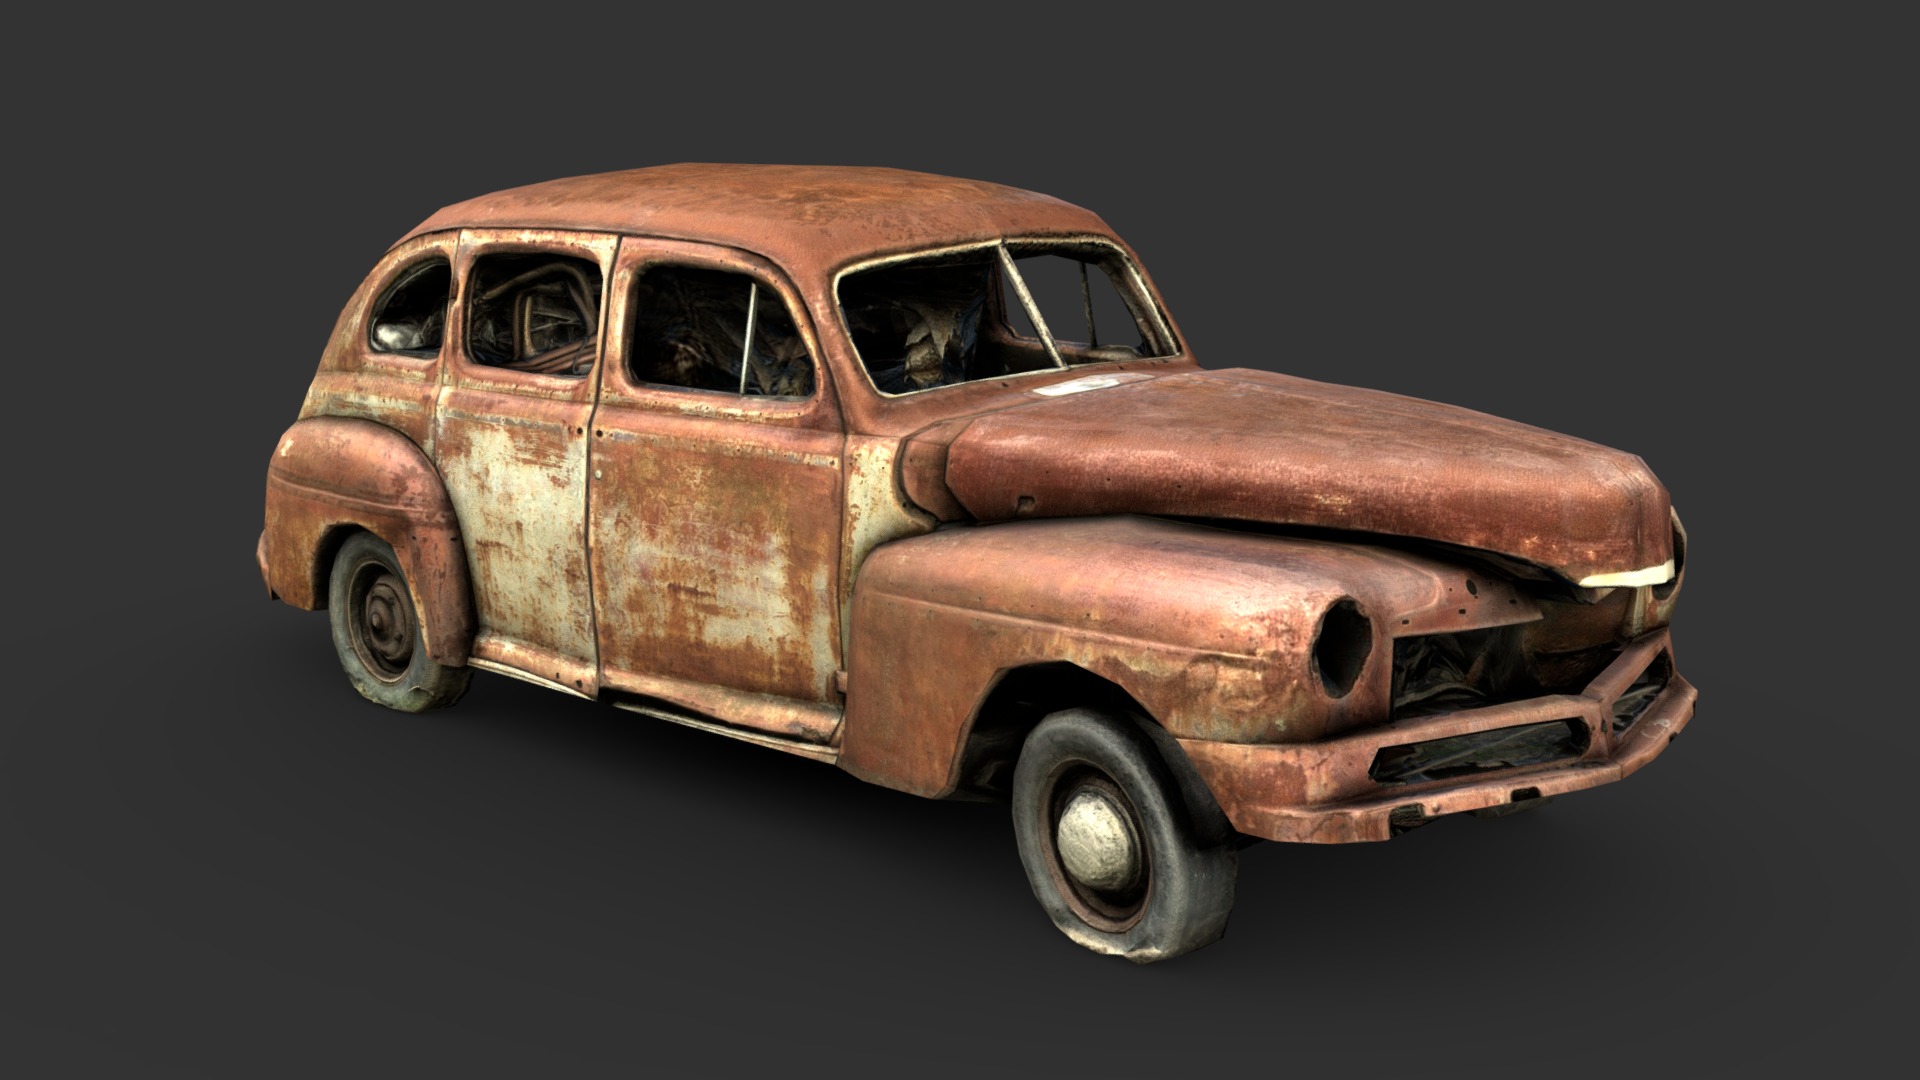 This car's missing so many pieces that it's unidentifiable. Made from a 3D scan, and turned into a gameready piece as practice.

Retopologized in Topogun and 3DSMax, texture tweaking and baking done in substance painter 3d model